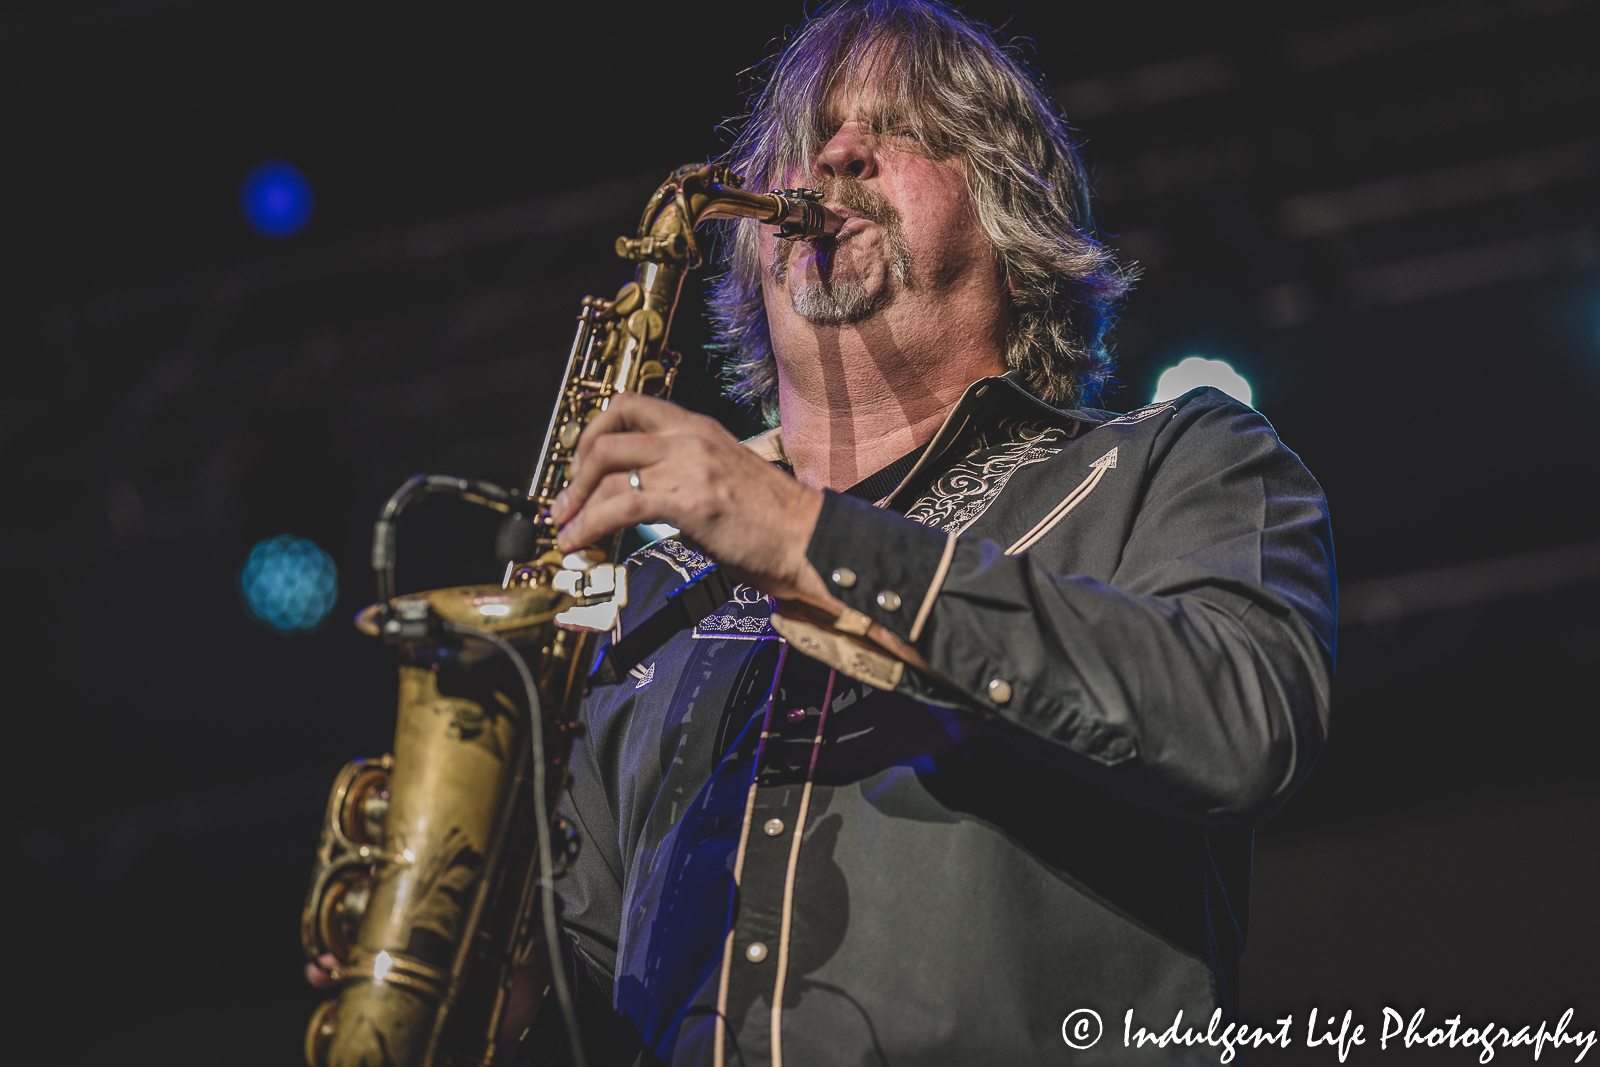 Multi-instrumentalist Marcus James Henderson of The Marshall Tucker Band playing the saxophone live at Ameristar Casino's Star Pavilion in Kansas City, MO on October 28, 2022.